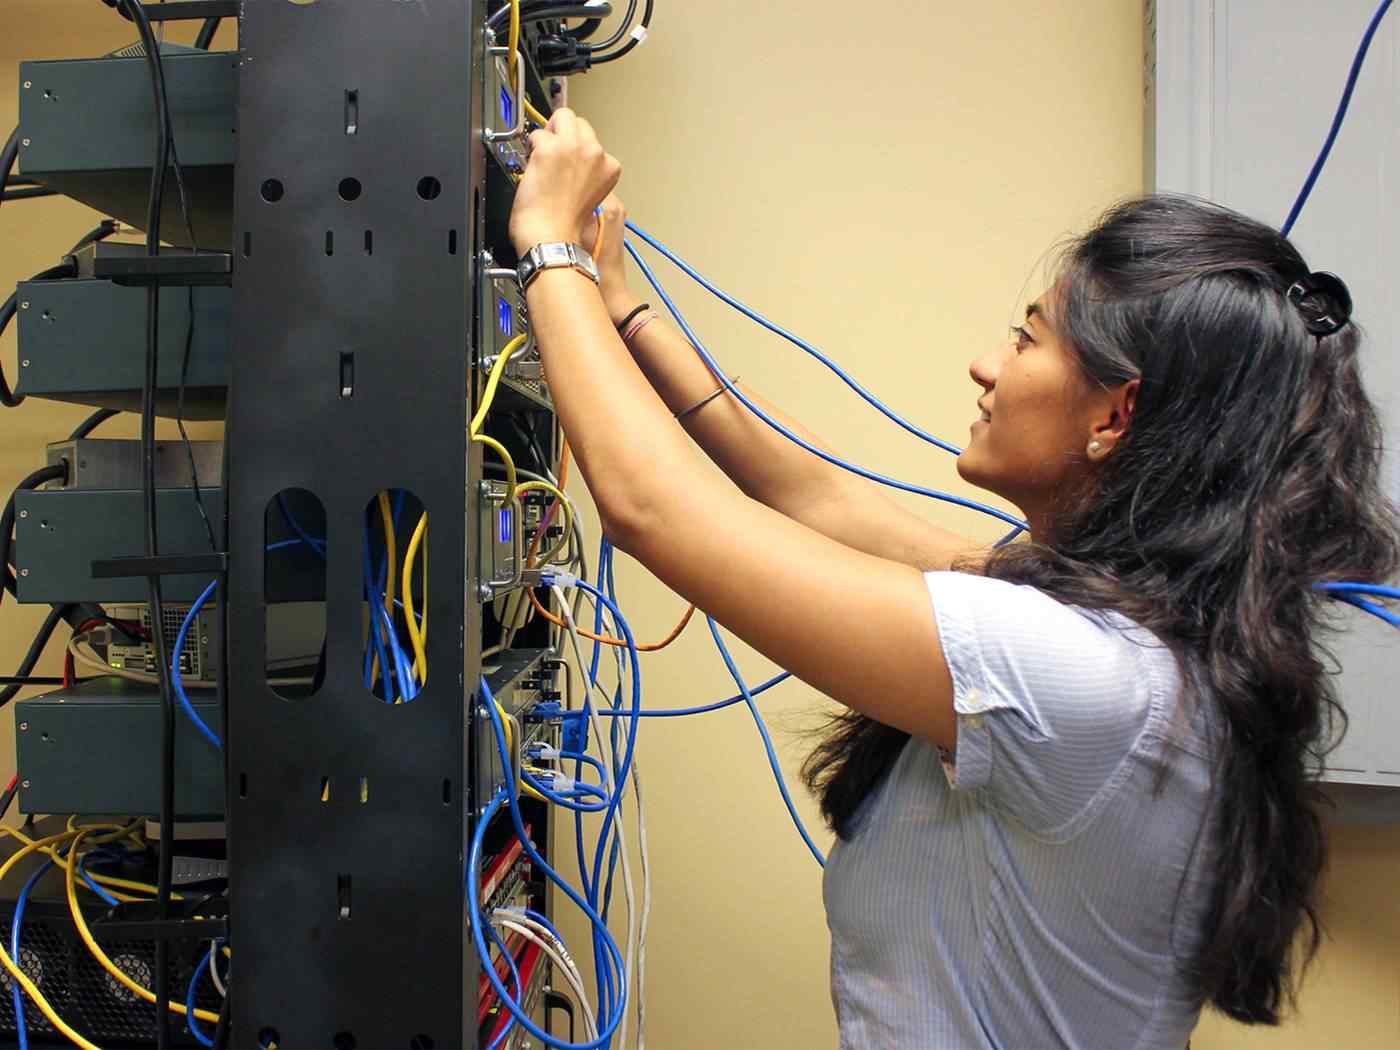 Electrical Engineering student working on wires on the job.